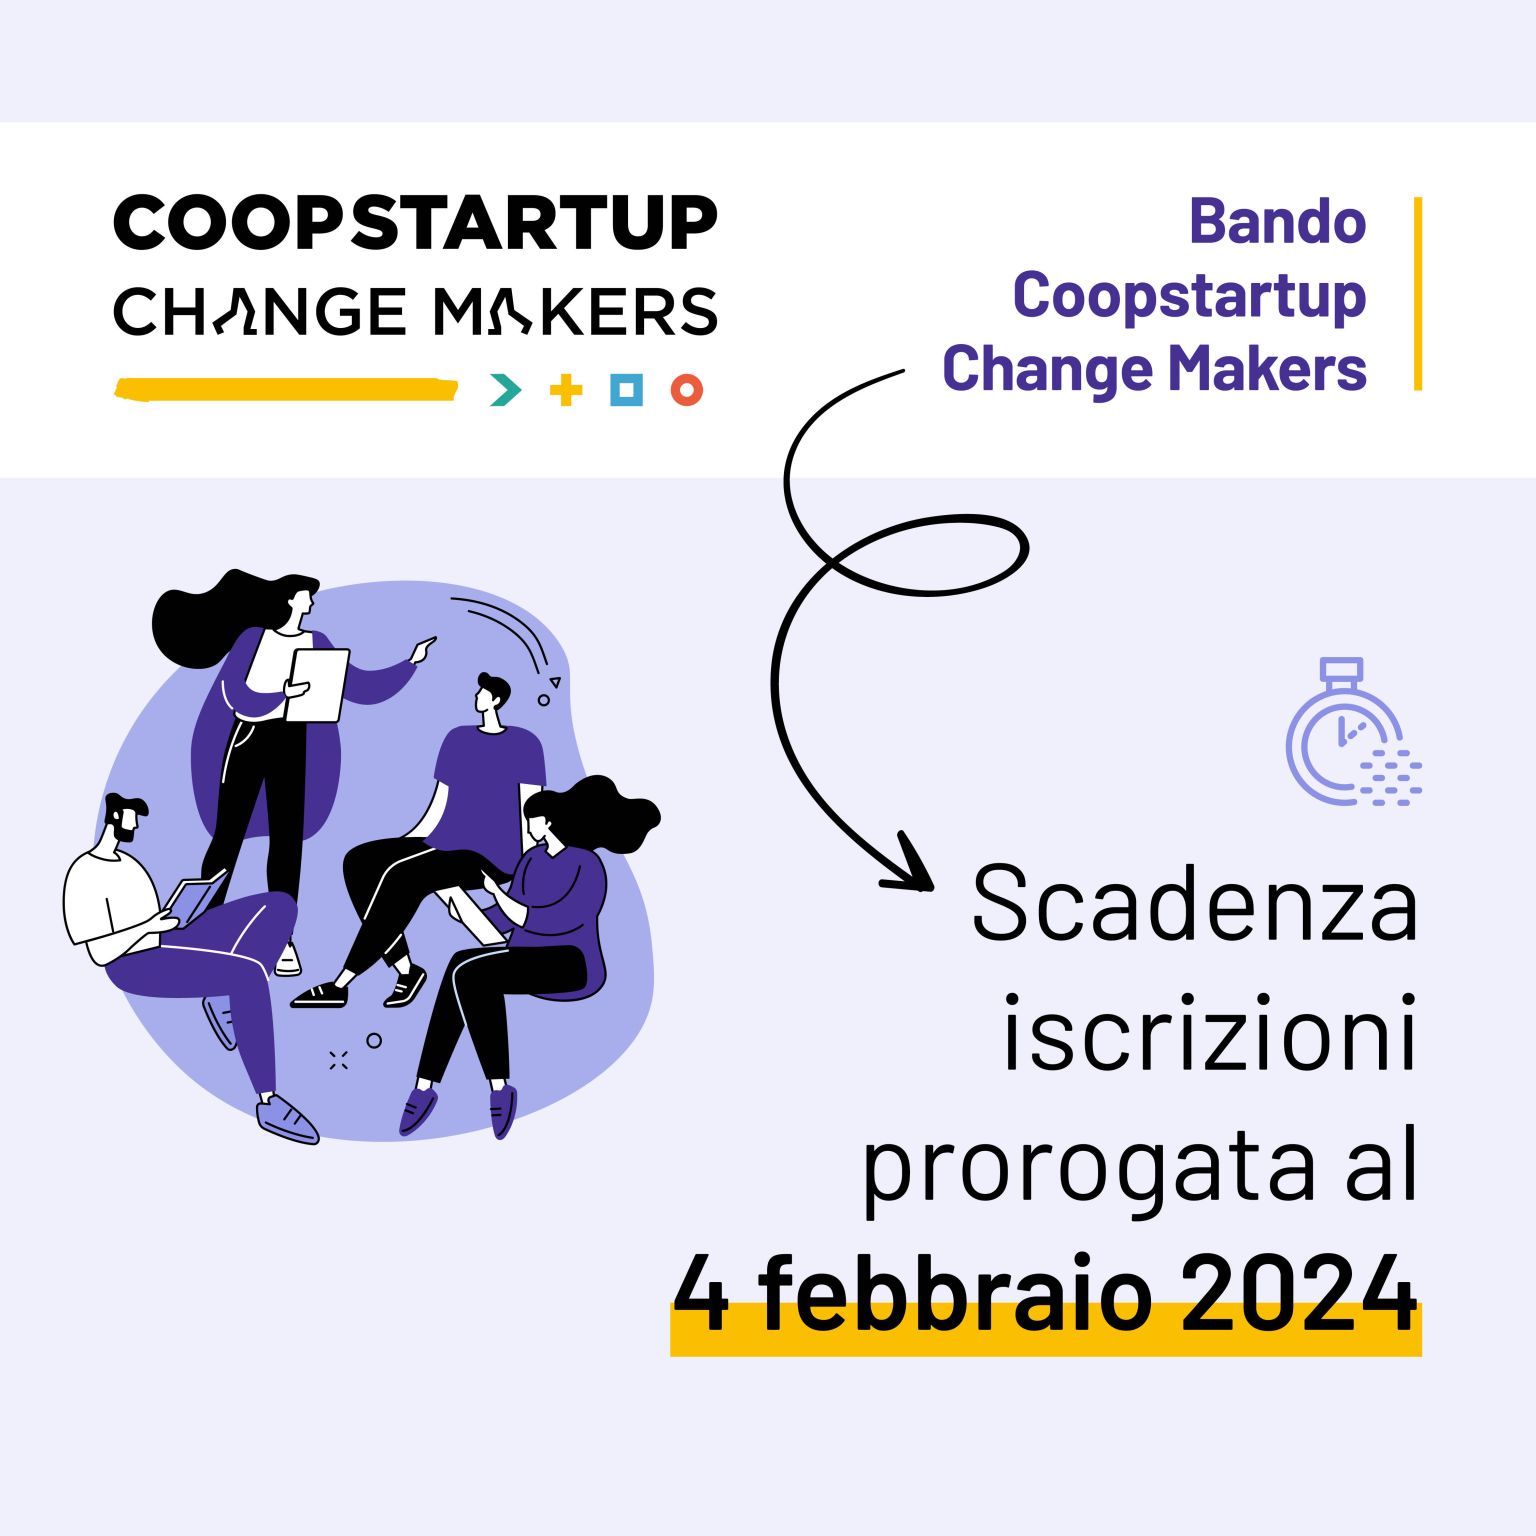 Coopstartup change makers